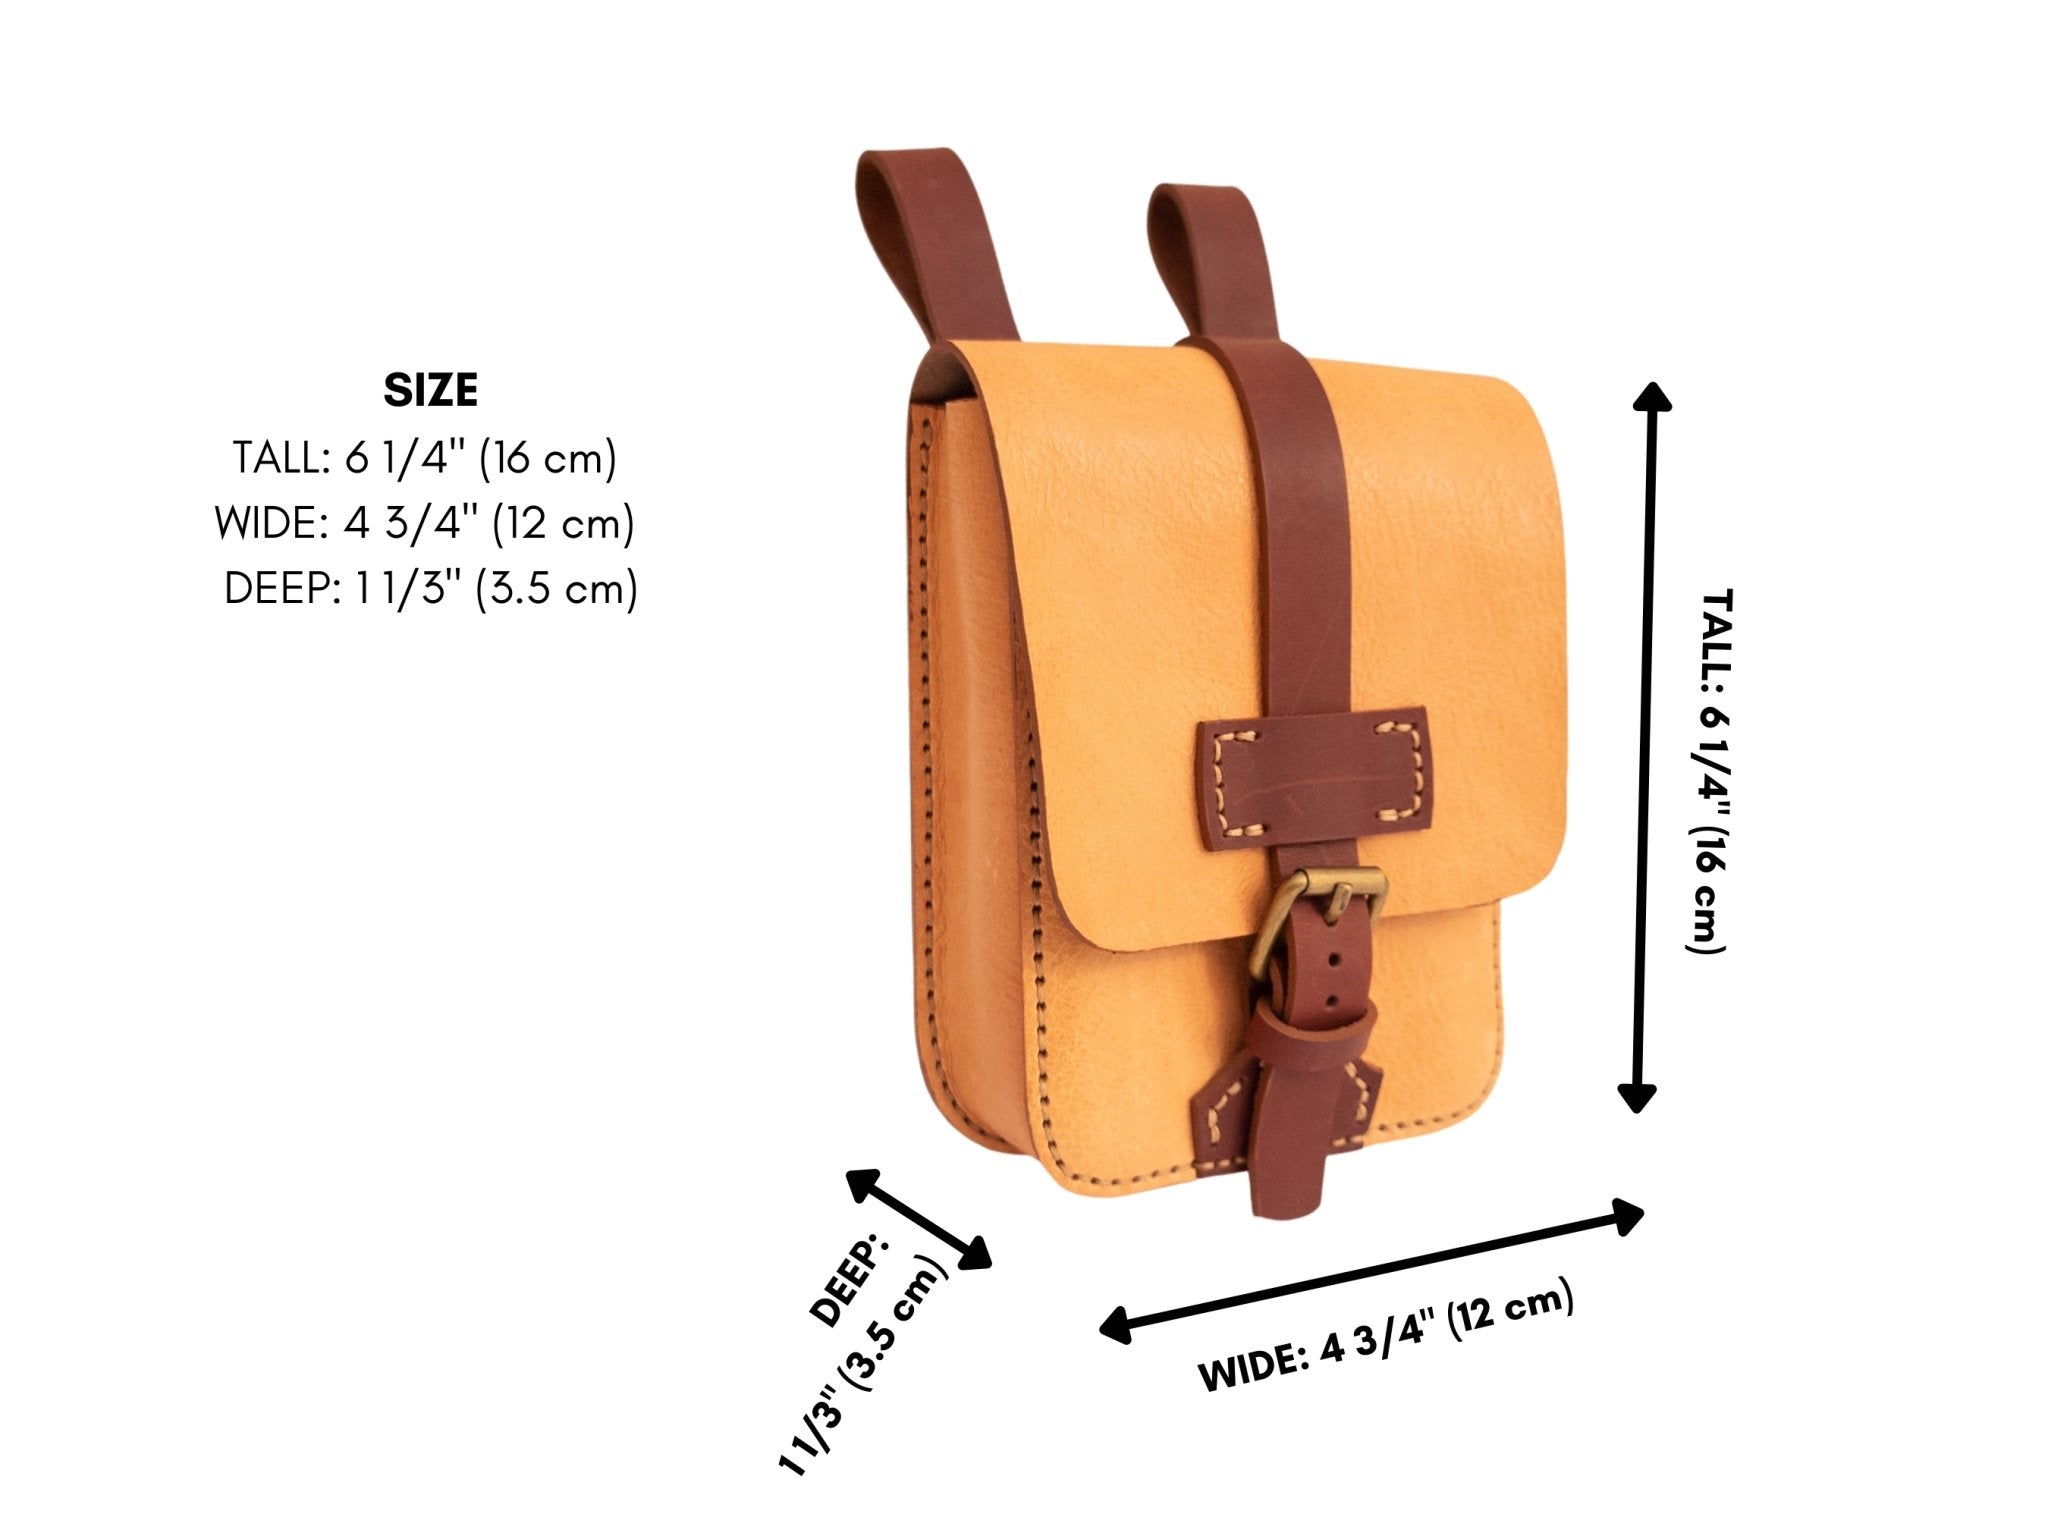 Shane Leather Belt Bag, PDF Pattern and Video - Vasile and Pavel